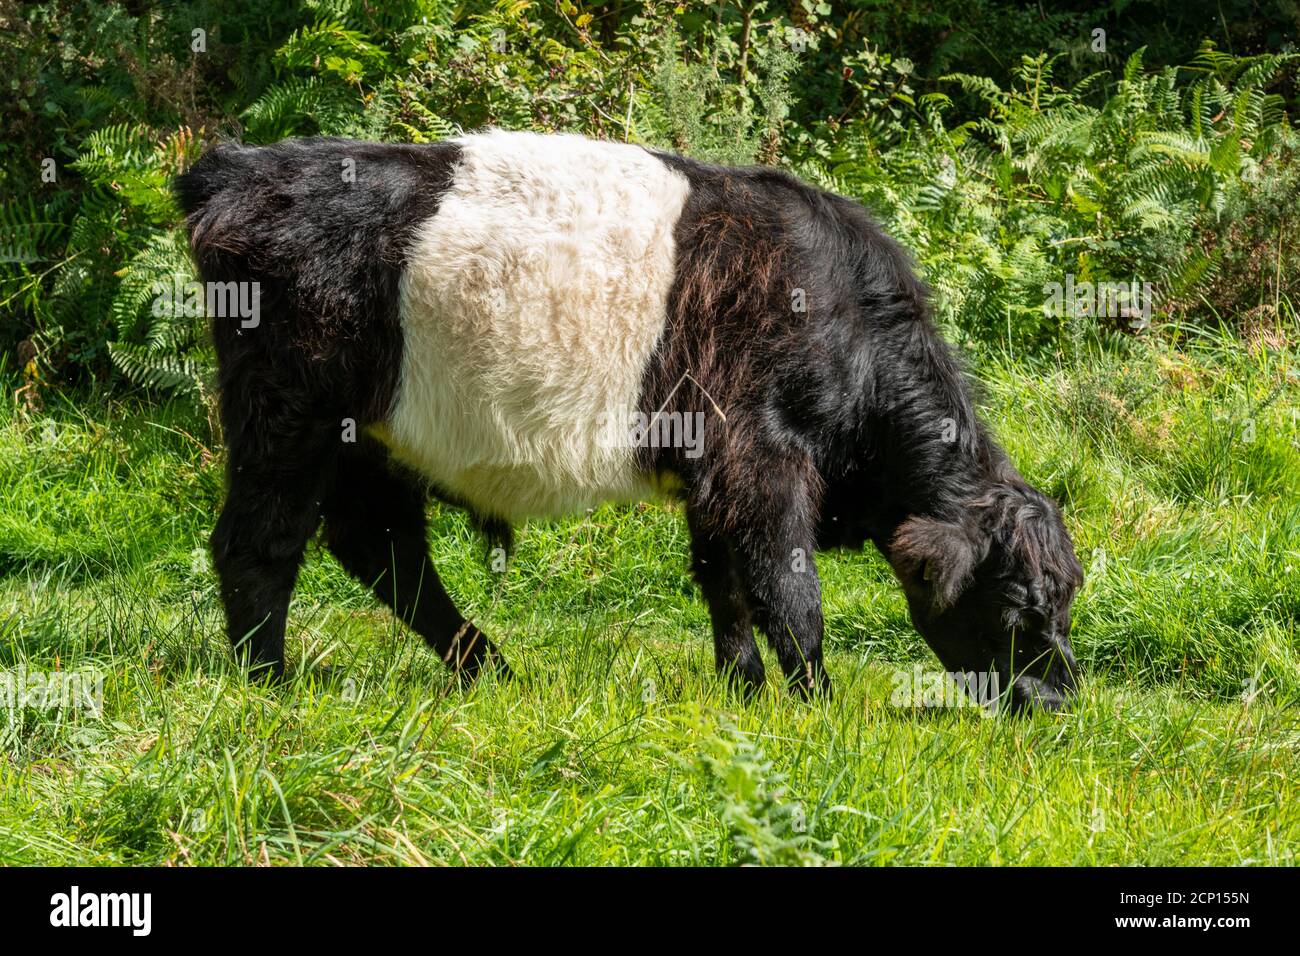 Belted galloway cattle, Scottish hardy beef cattle breed, black with a white band round his middle, being used for habitat vegetation management Stock Photo